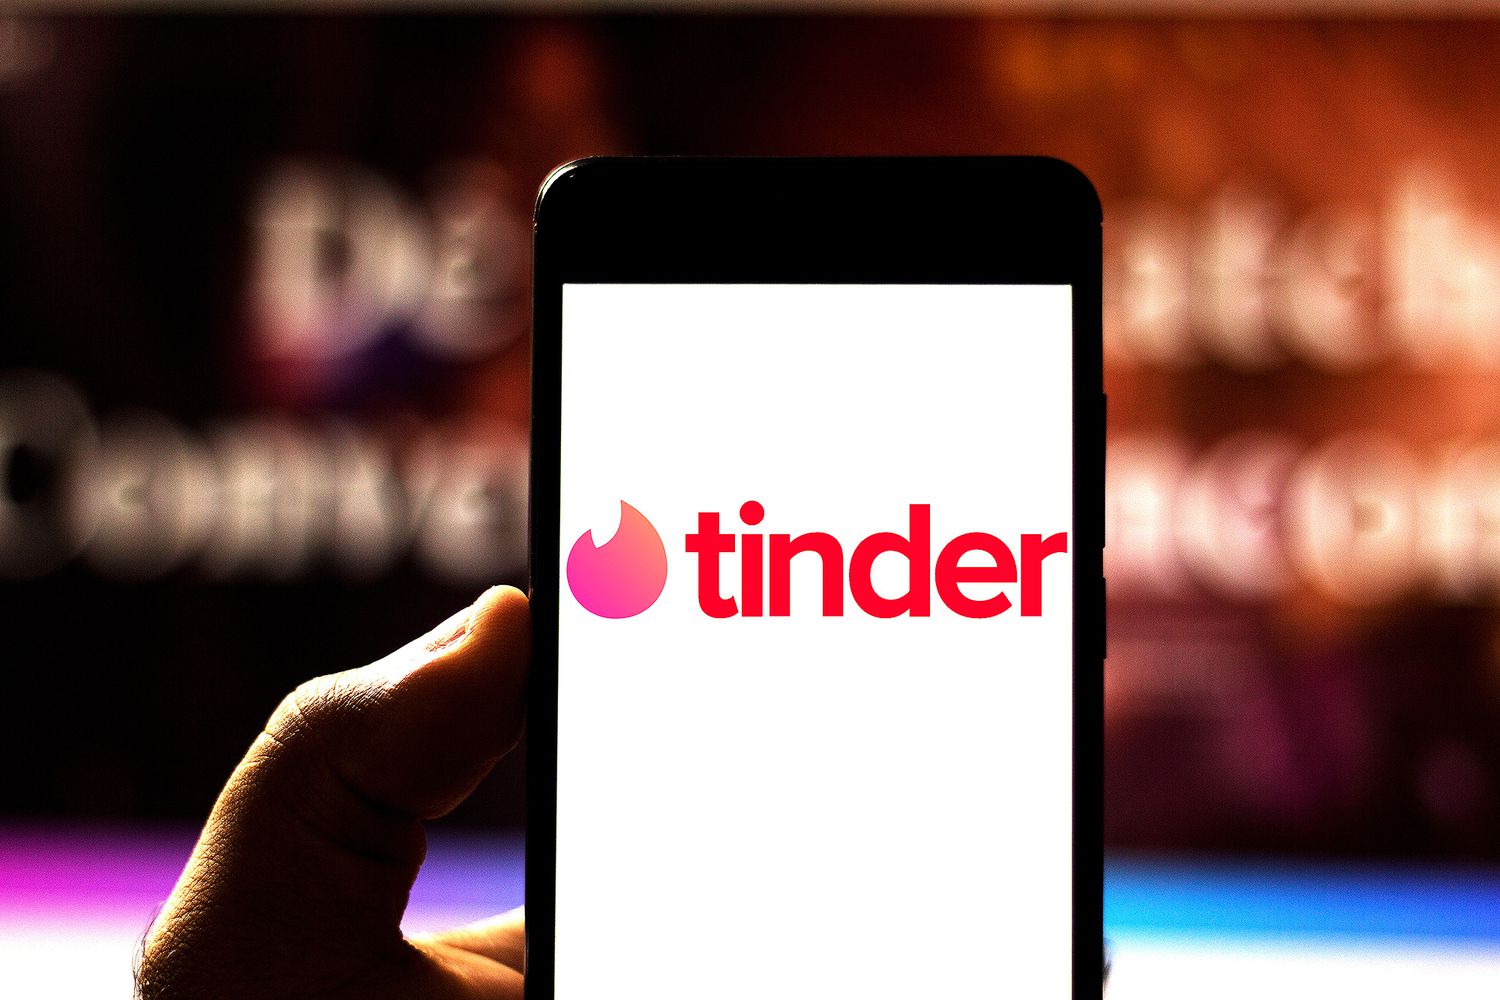 Dating apps like Tinder and Bumble are free. But people say paying for them is worth the money.